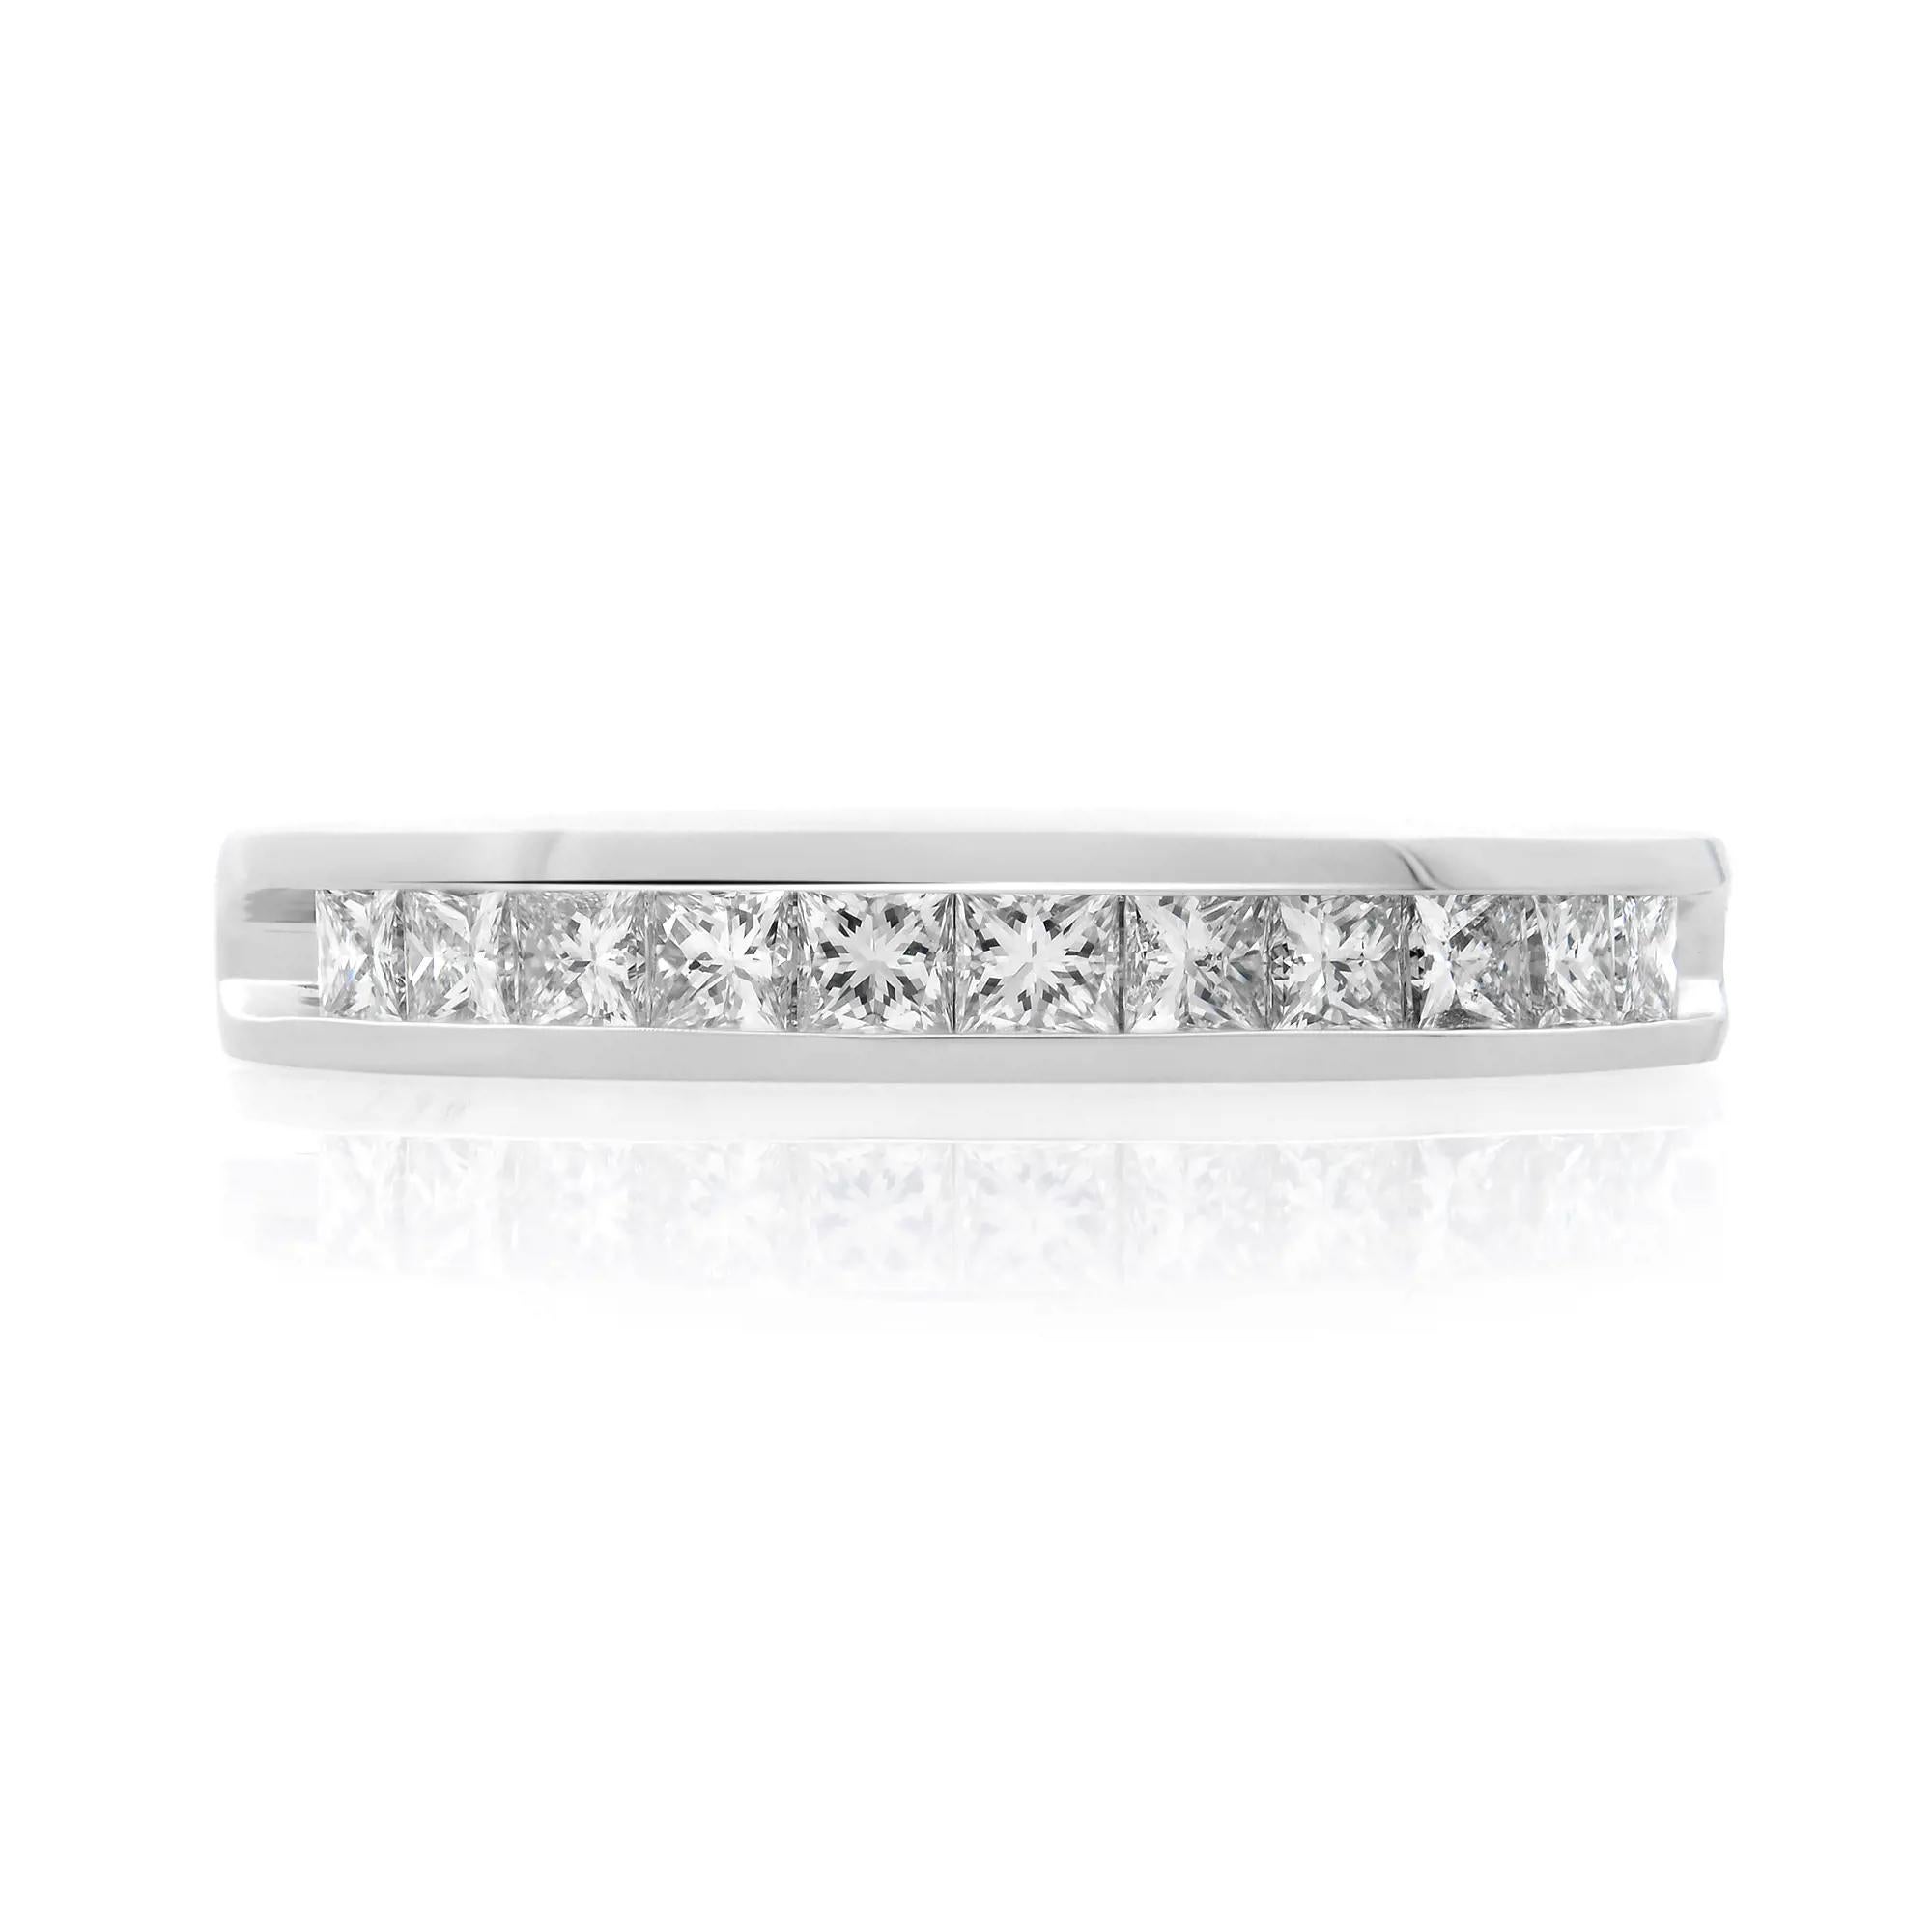 This beautiful and classic ladies wedding band ring features 11 princess cut dazzling diamonds. All diamonds are channel set in a solid platinum setting. Total diamond weight: 0.50 carat. Diamond color G-H and VS-SI clarity. Band width: 3.3 mm. Ring